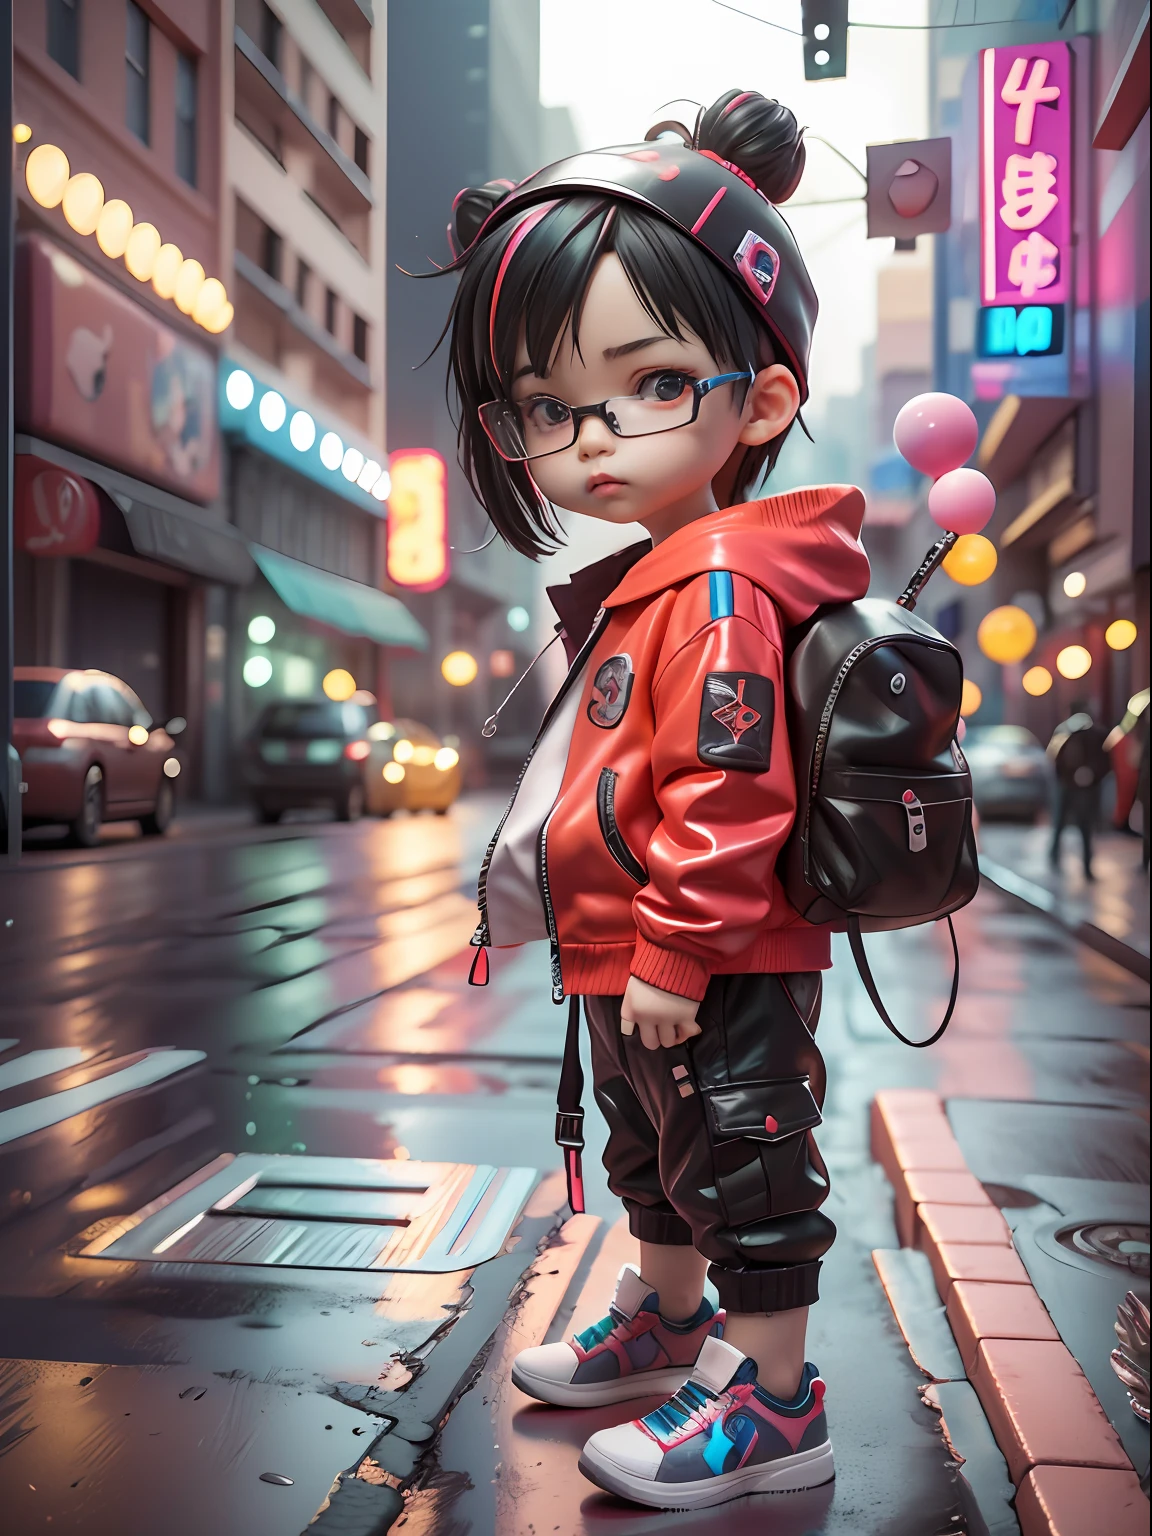 3d toy, 3d rendering, ip, cyberpunk style, chibi, cute little boy, mask, simple background, best quality, c4d, blender, 3D MODEL, TOYS, VIVID COLORS, STREET STYLE, HIGH RESOLUTION, A LOT OF DETAILS, PIXAR, CANDY COLORS, BIG SHOES, FASHION TRENDS, ART